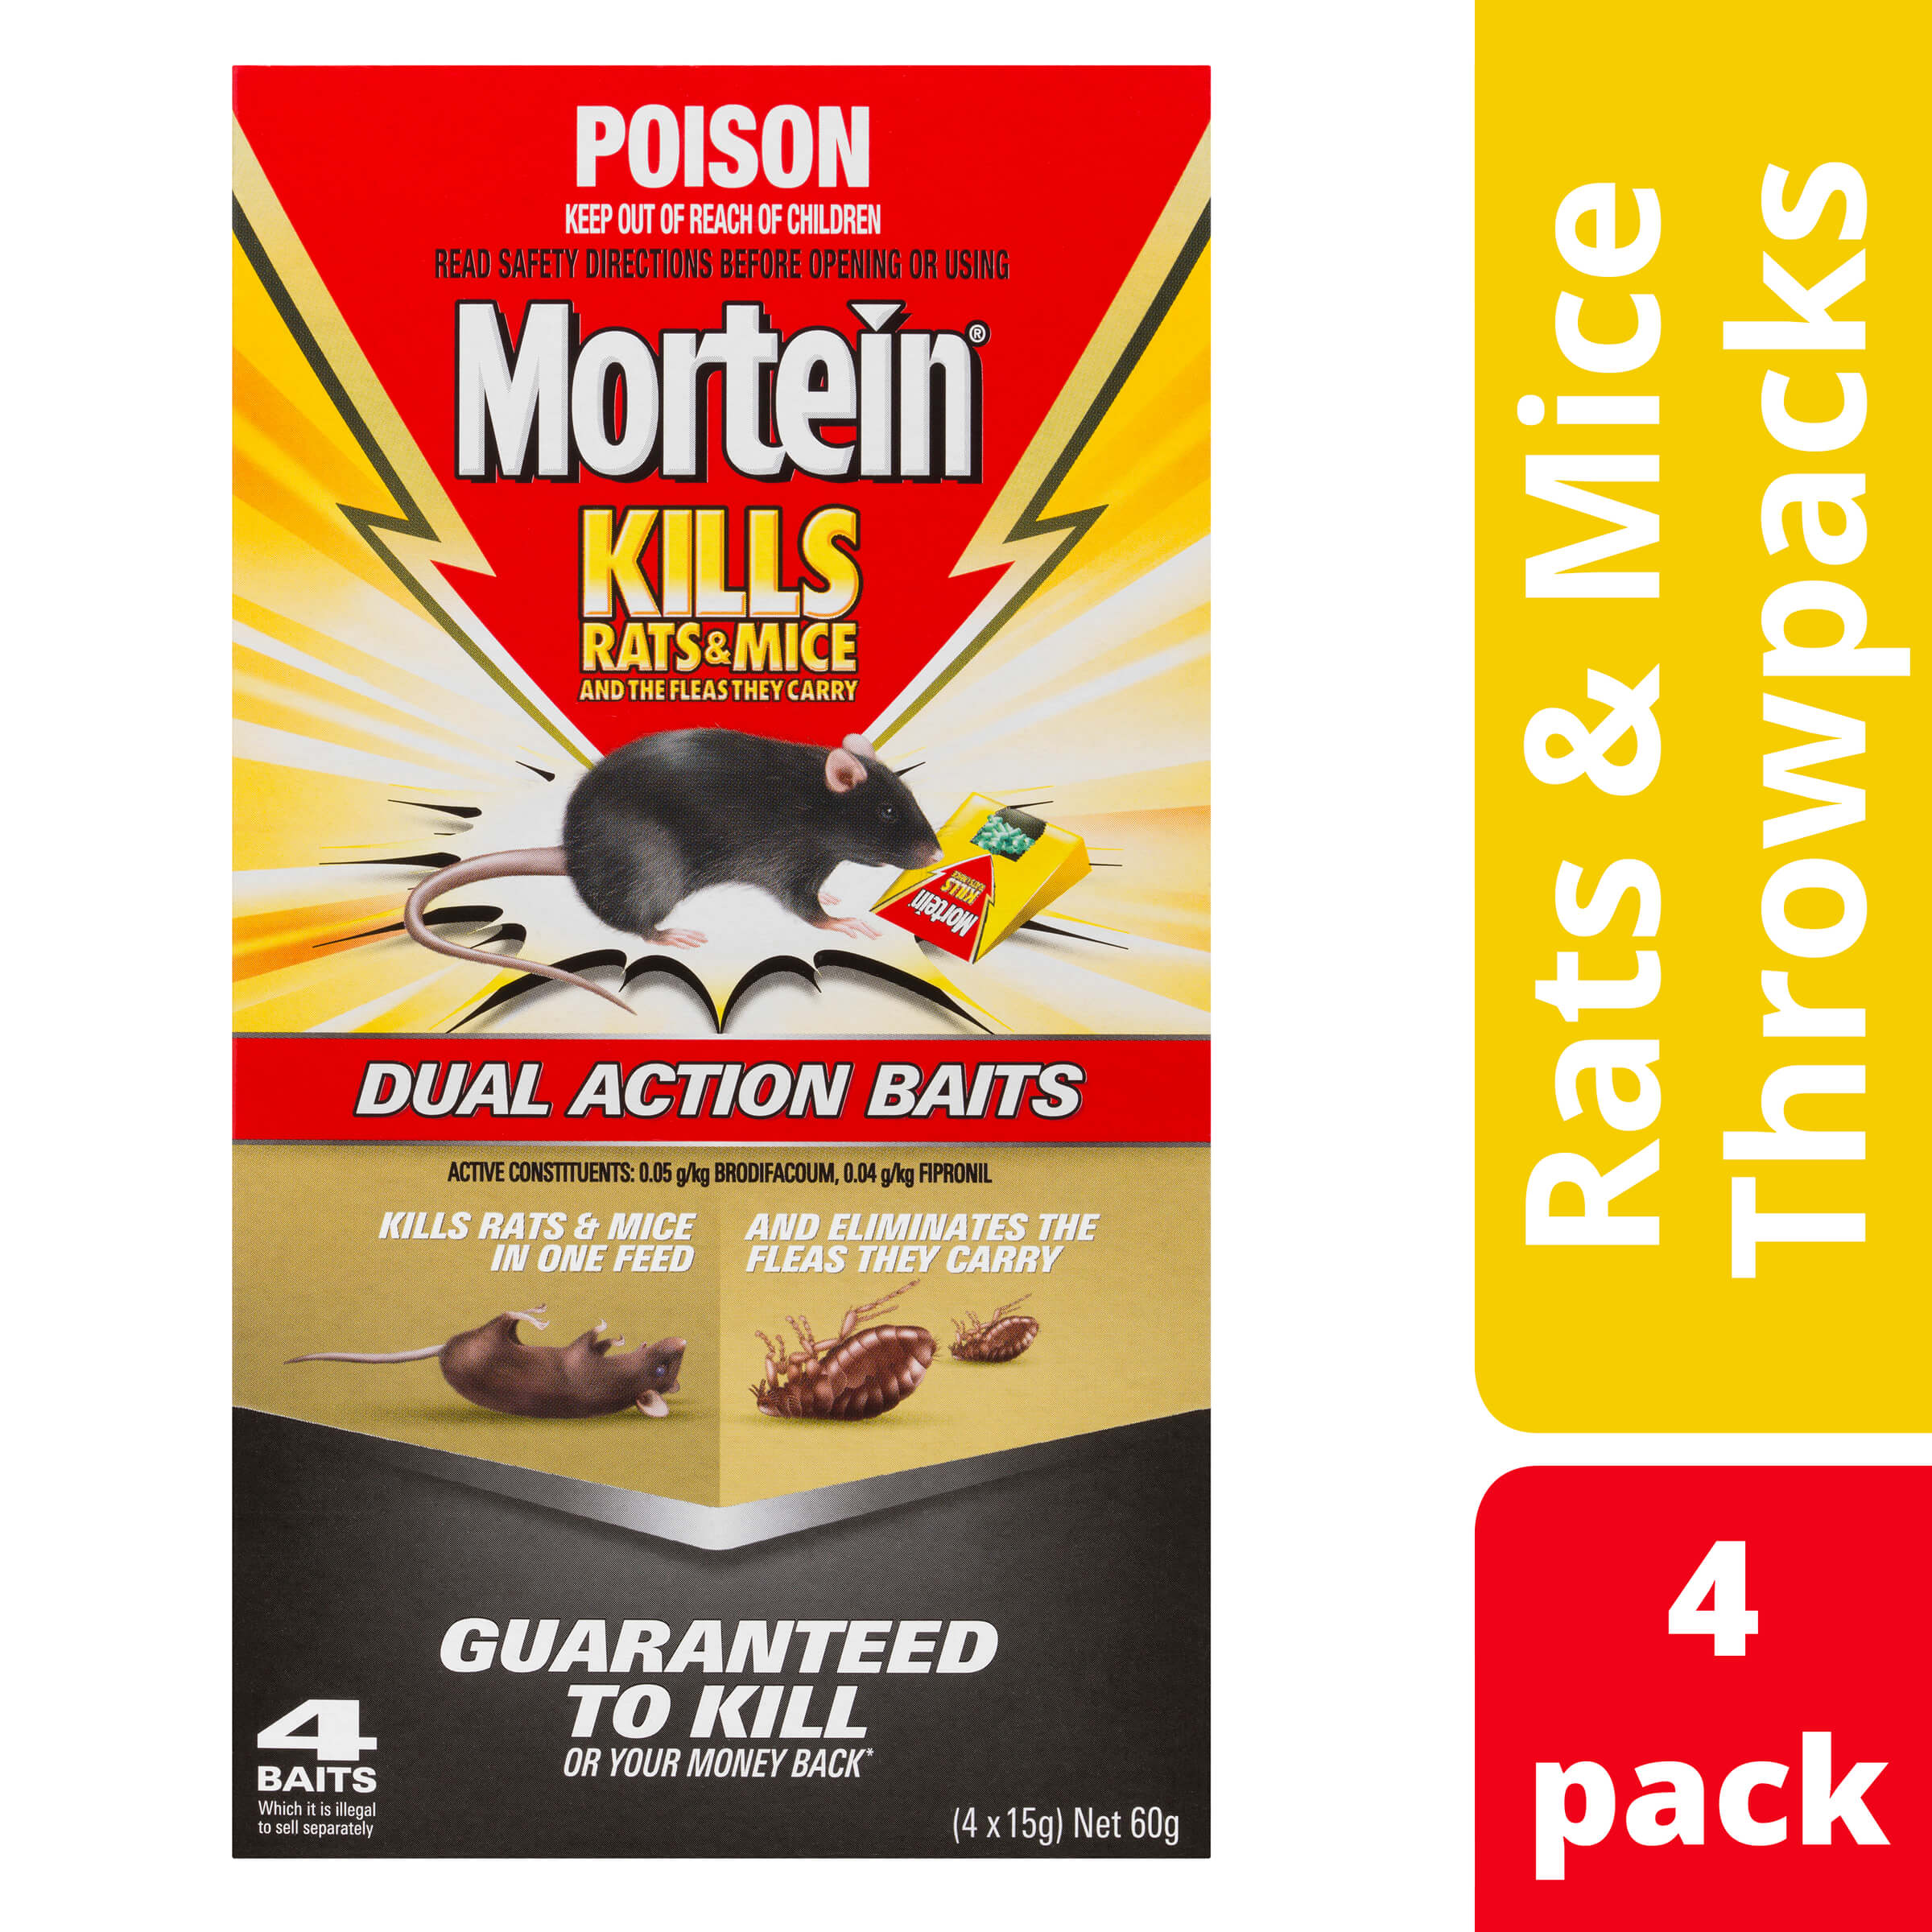 https://www.mortein.com.au/media/products/Mortein-Dual-Action-Baits-4-Pack.jpg